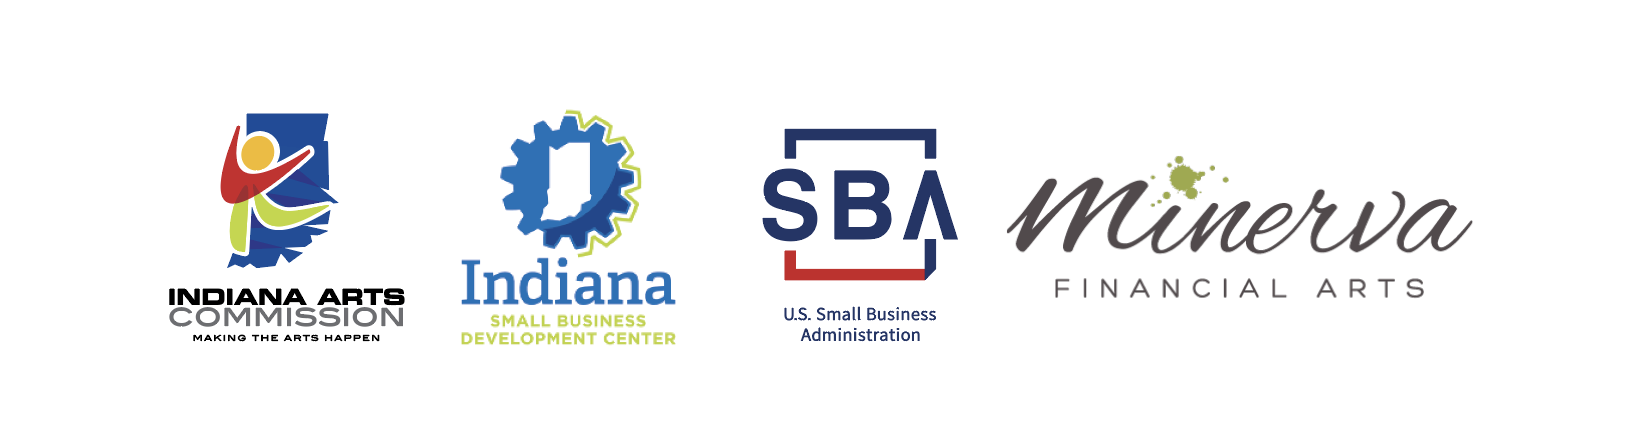 Indiana Arts Commission, Indiana Small Business Development Center, Small Business Administration, Minerva Financial Arts logos